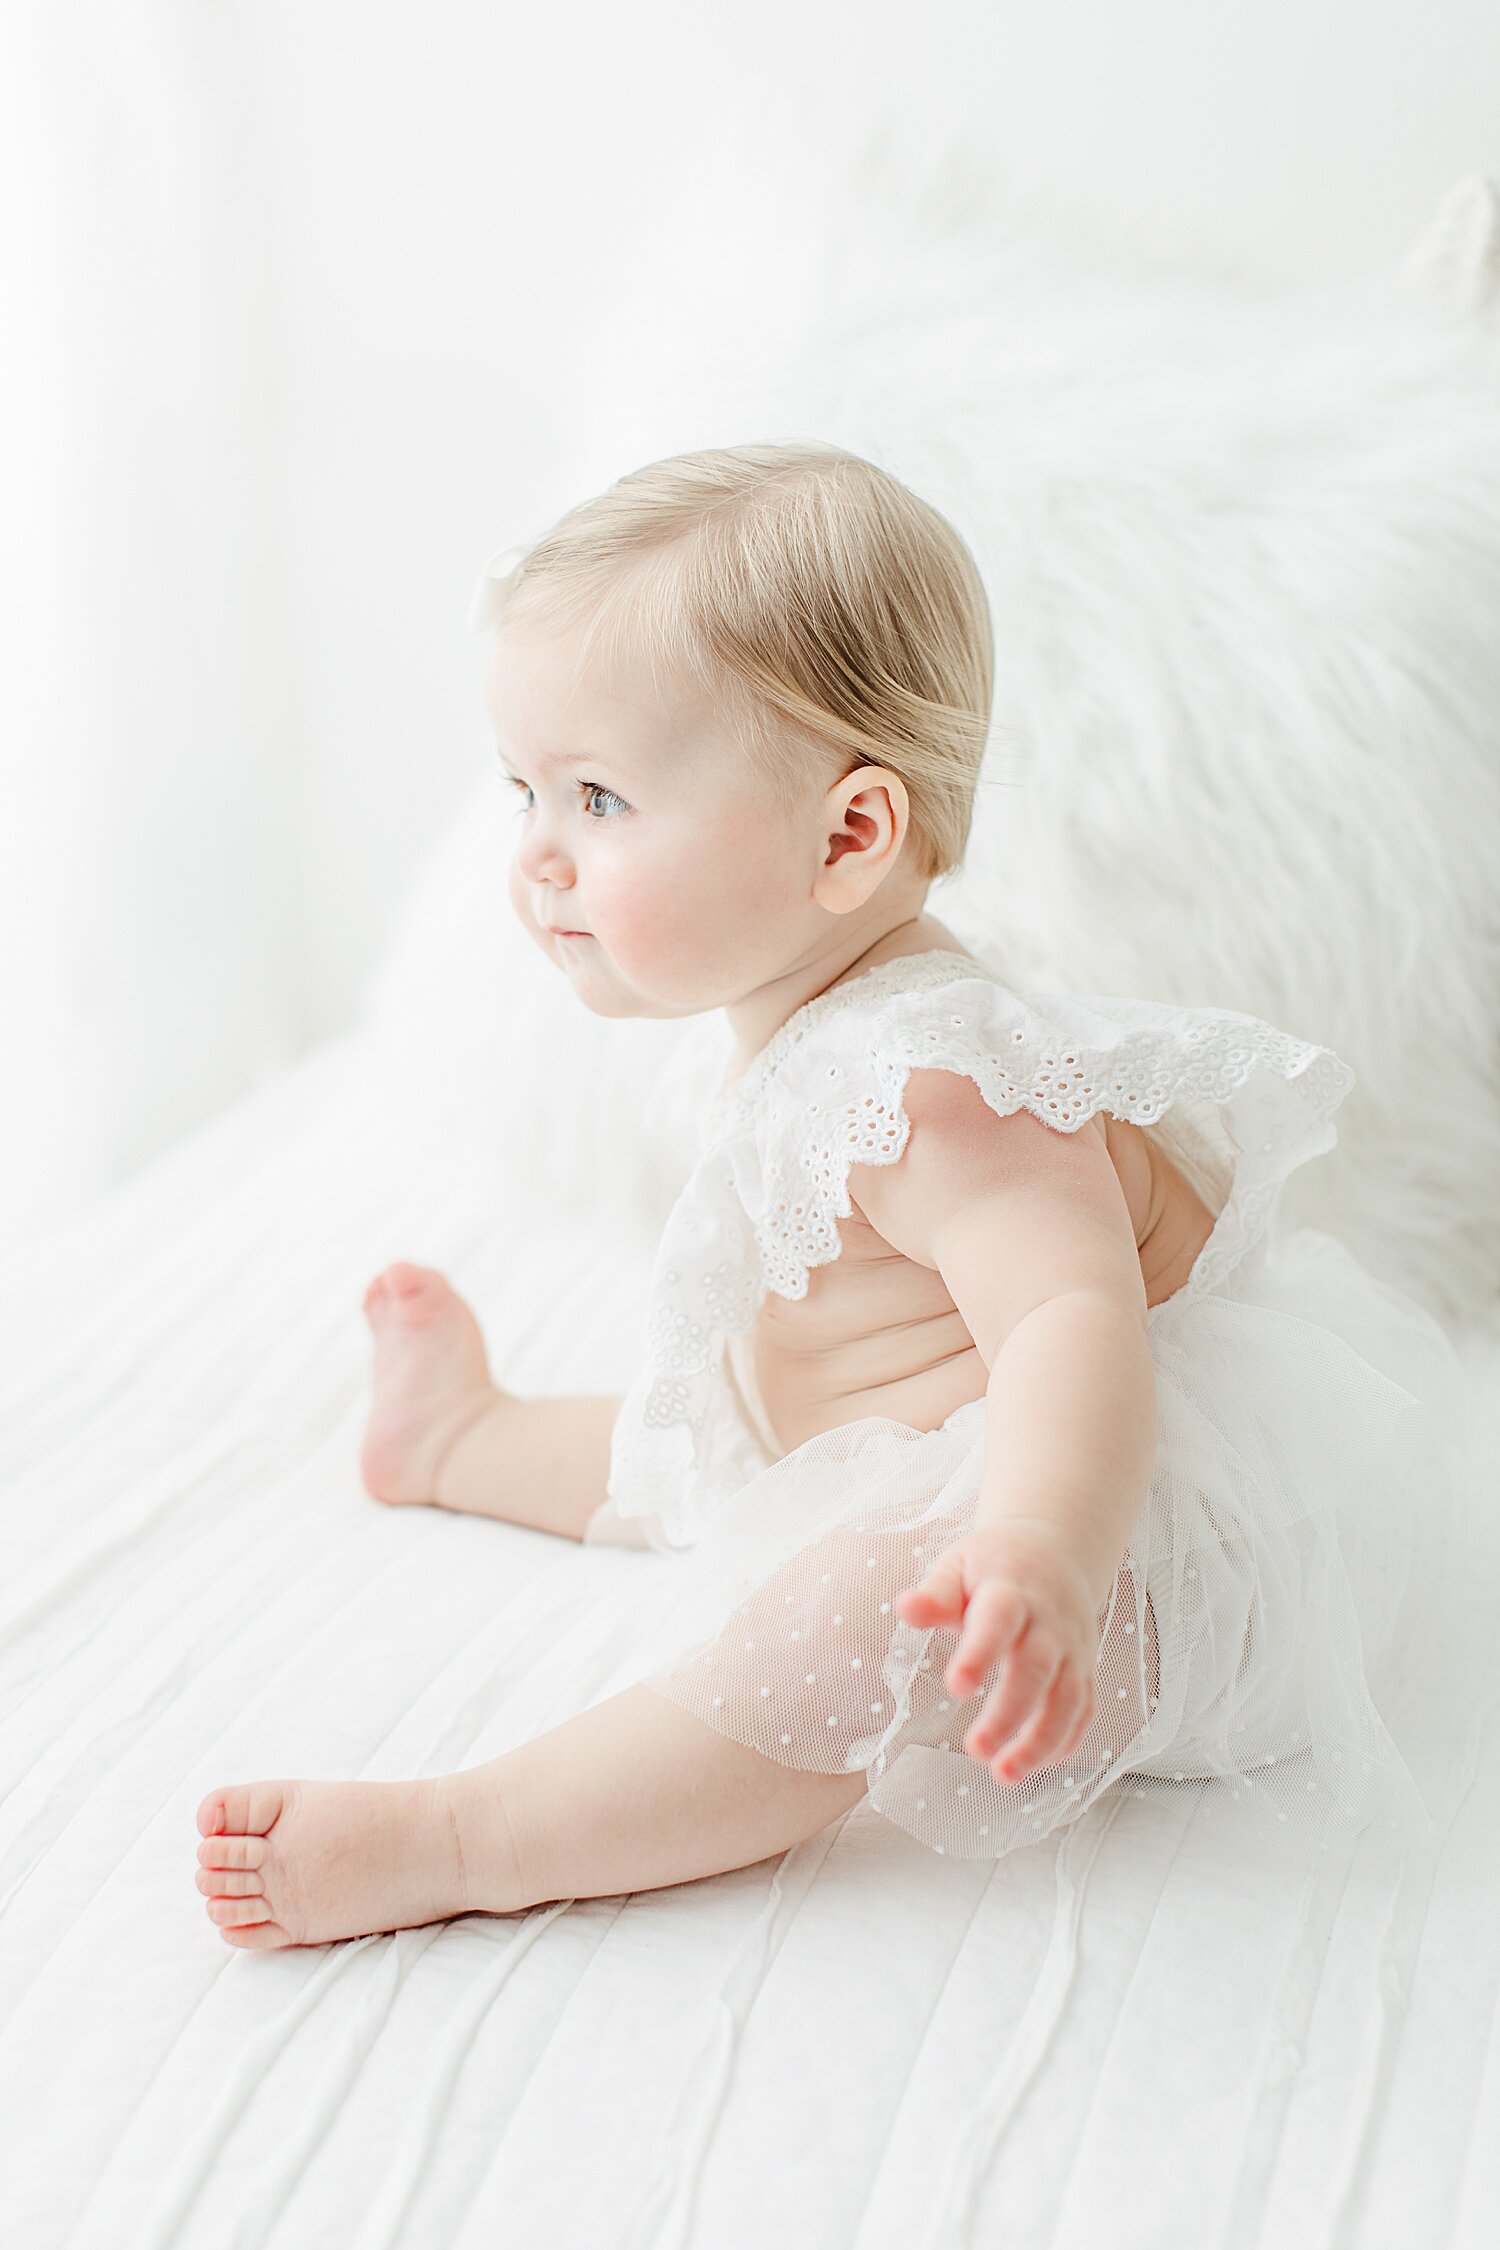 First birthday photoshoot in a studio in Darien, CT with Kristin Wood Photography. 